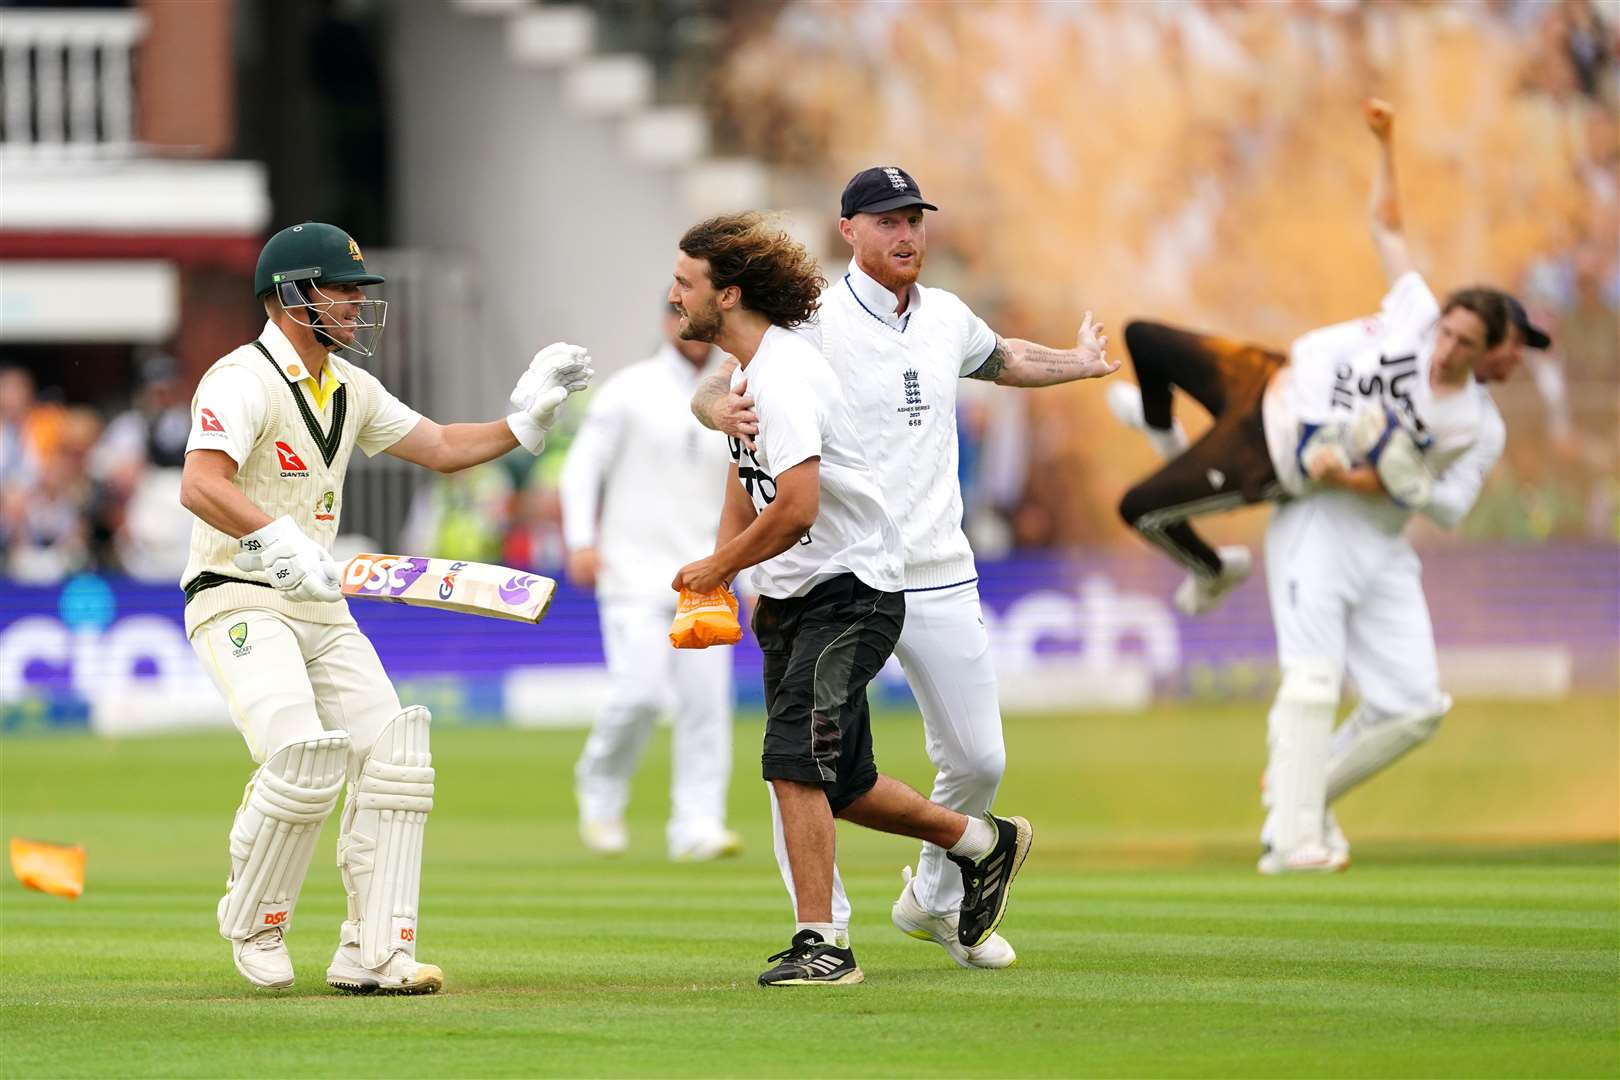 England cricketers grab Just Stop Oil protesters during day one of the second Ashes test match at Lord’s, London on June 28 (Mike Egerton/PA)